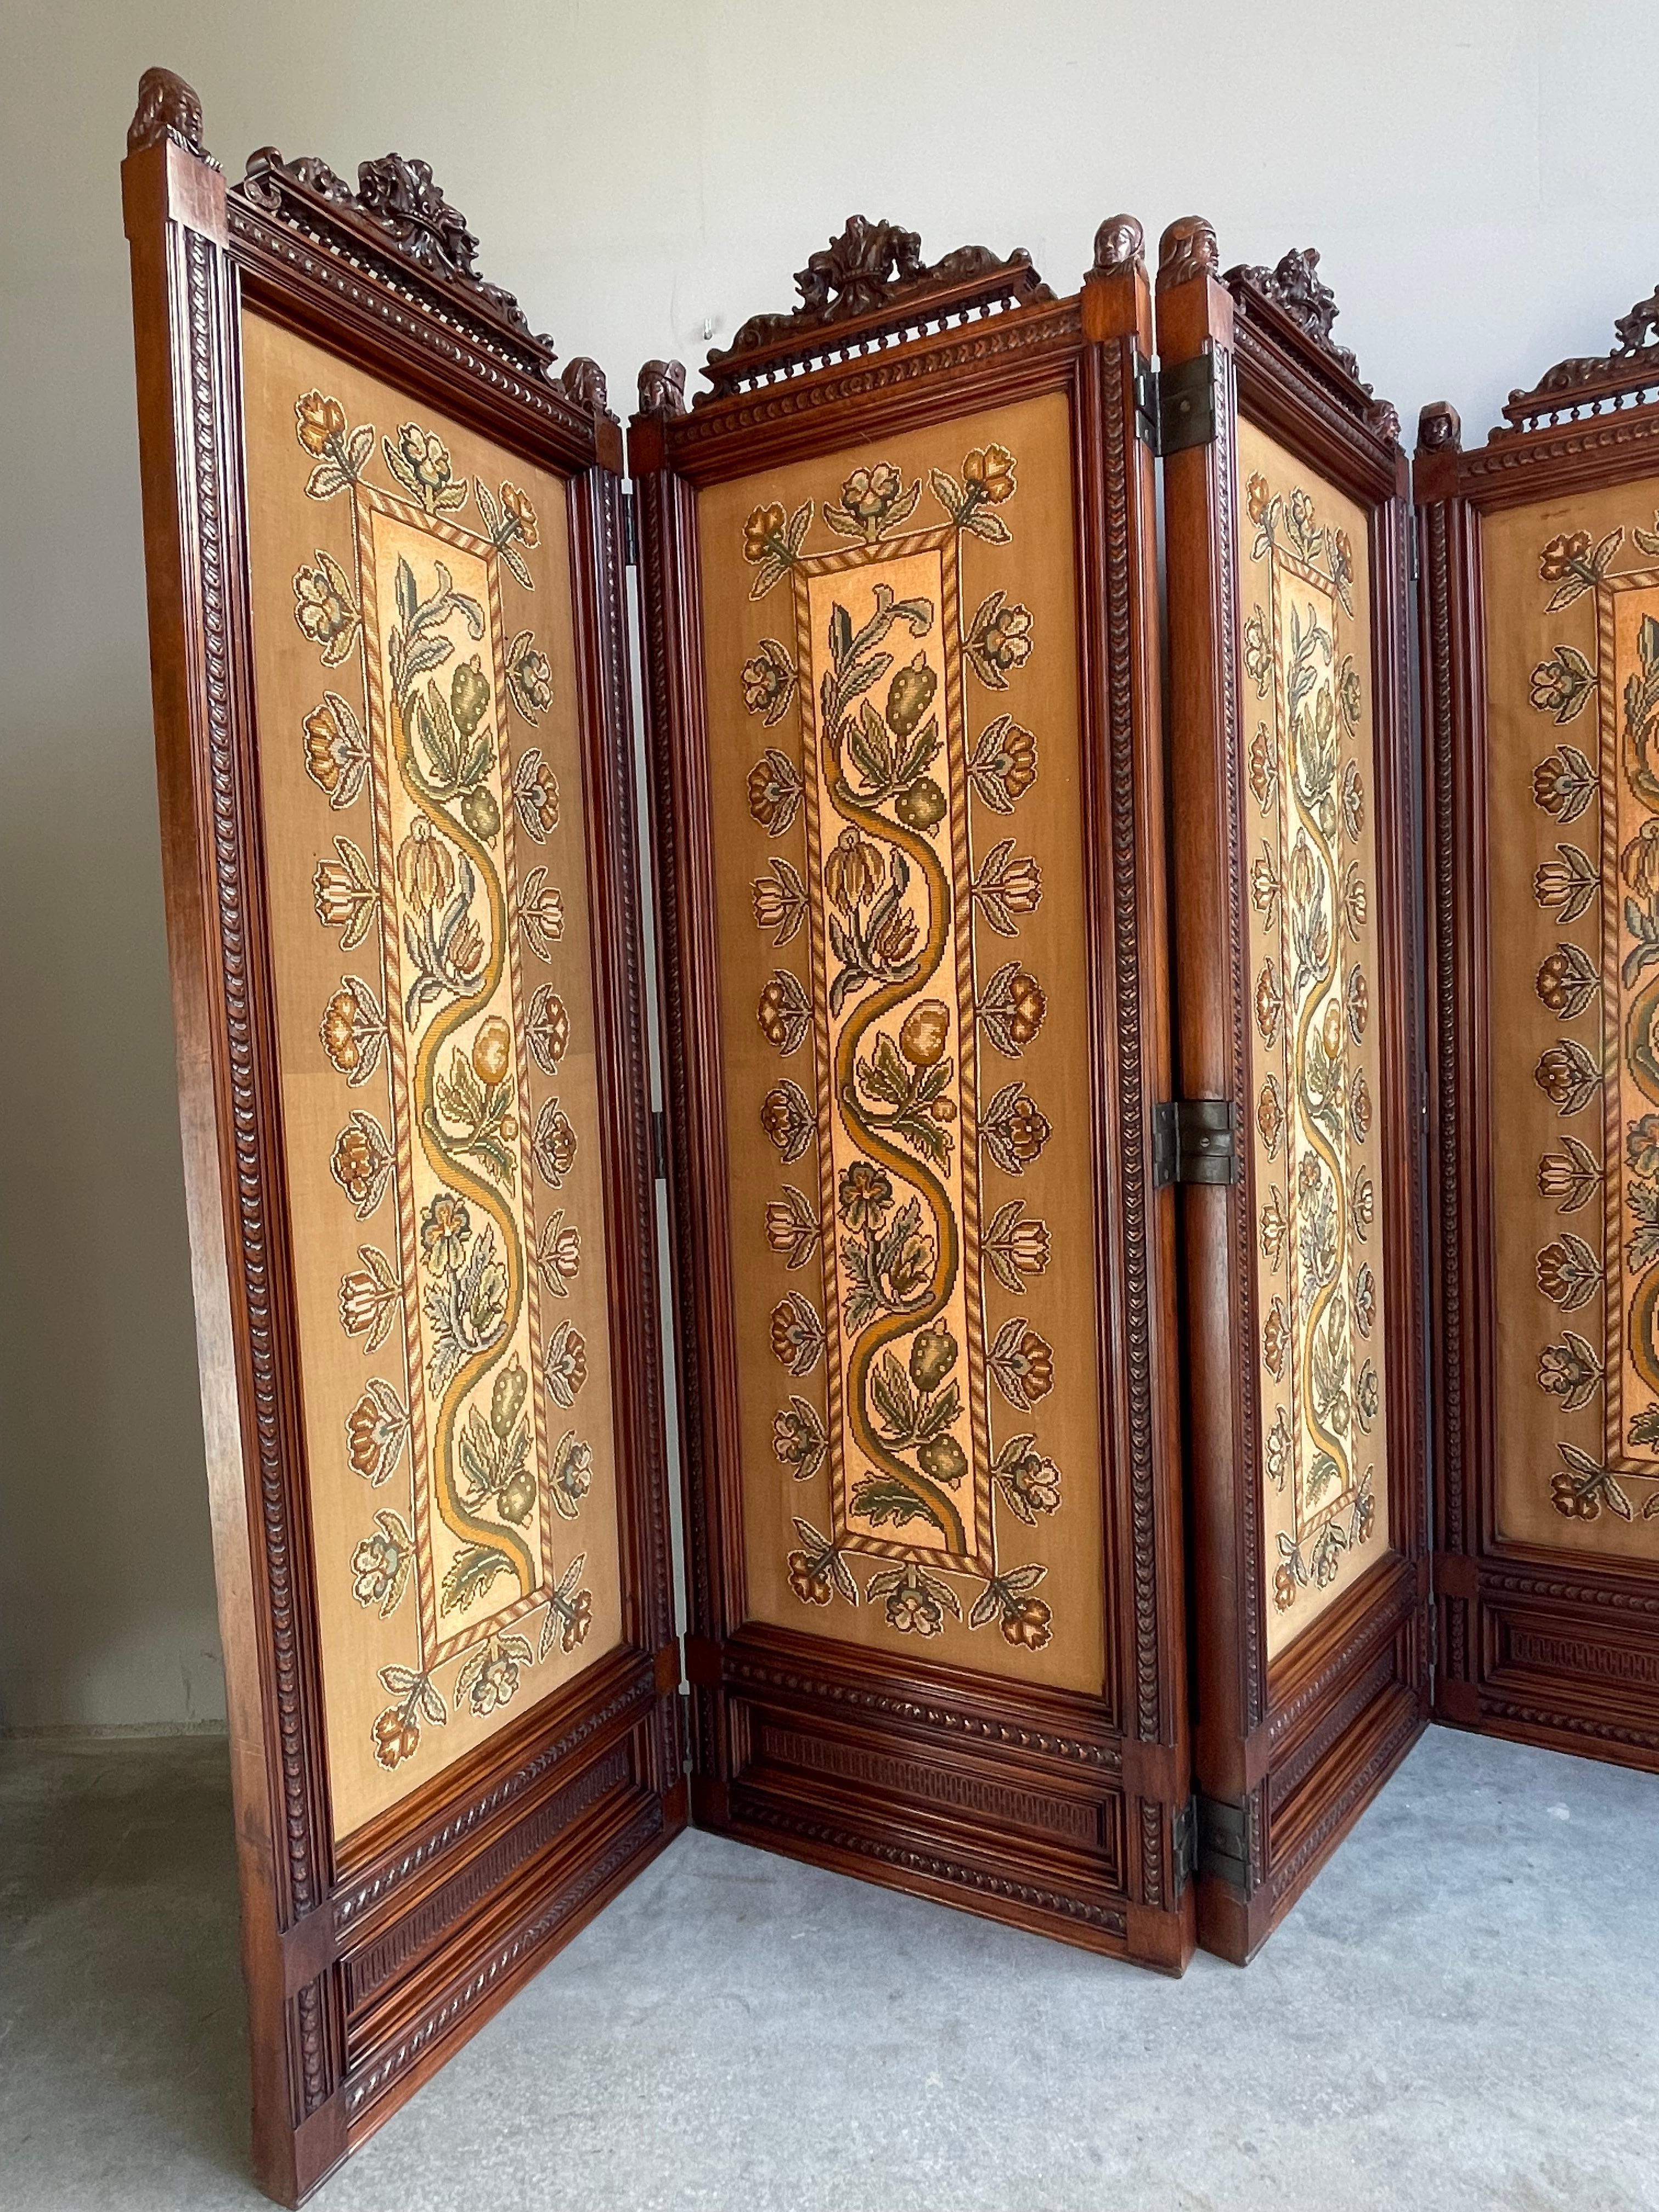 Unique and highly decorative, work of art folding screen, circa 1880.

If you collect only the best quality and best condition antiques in general and those from the European Renaissance Revival era in particular then this amazing workmanship and